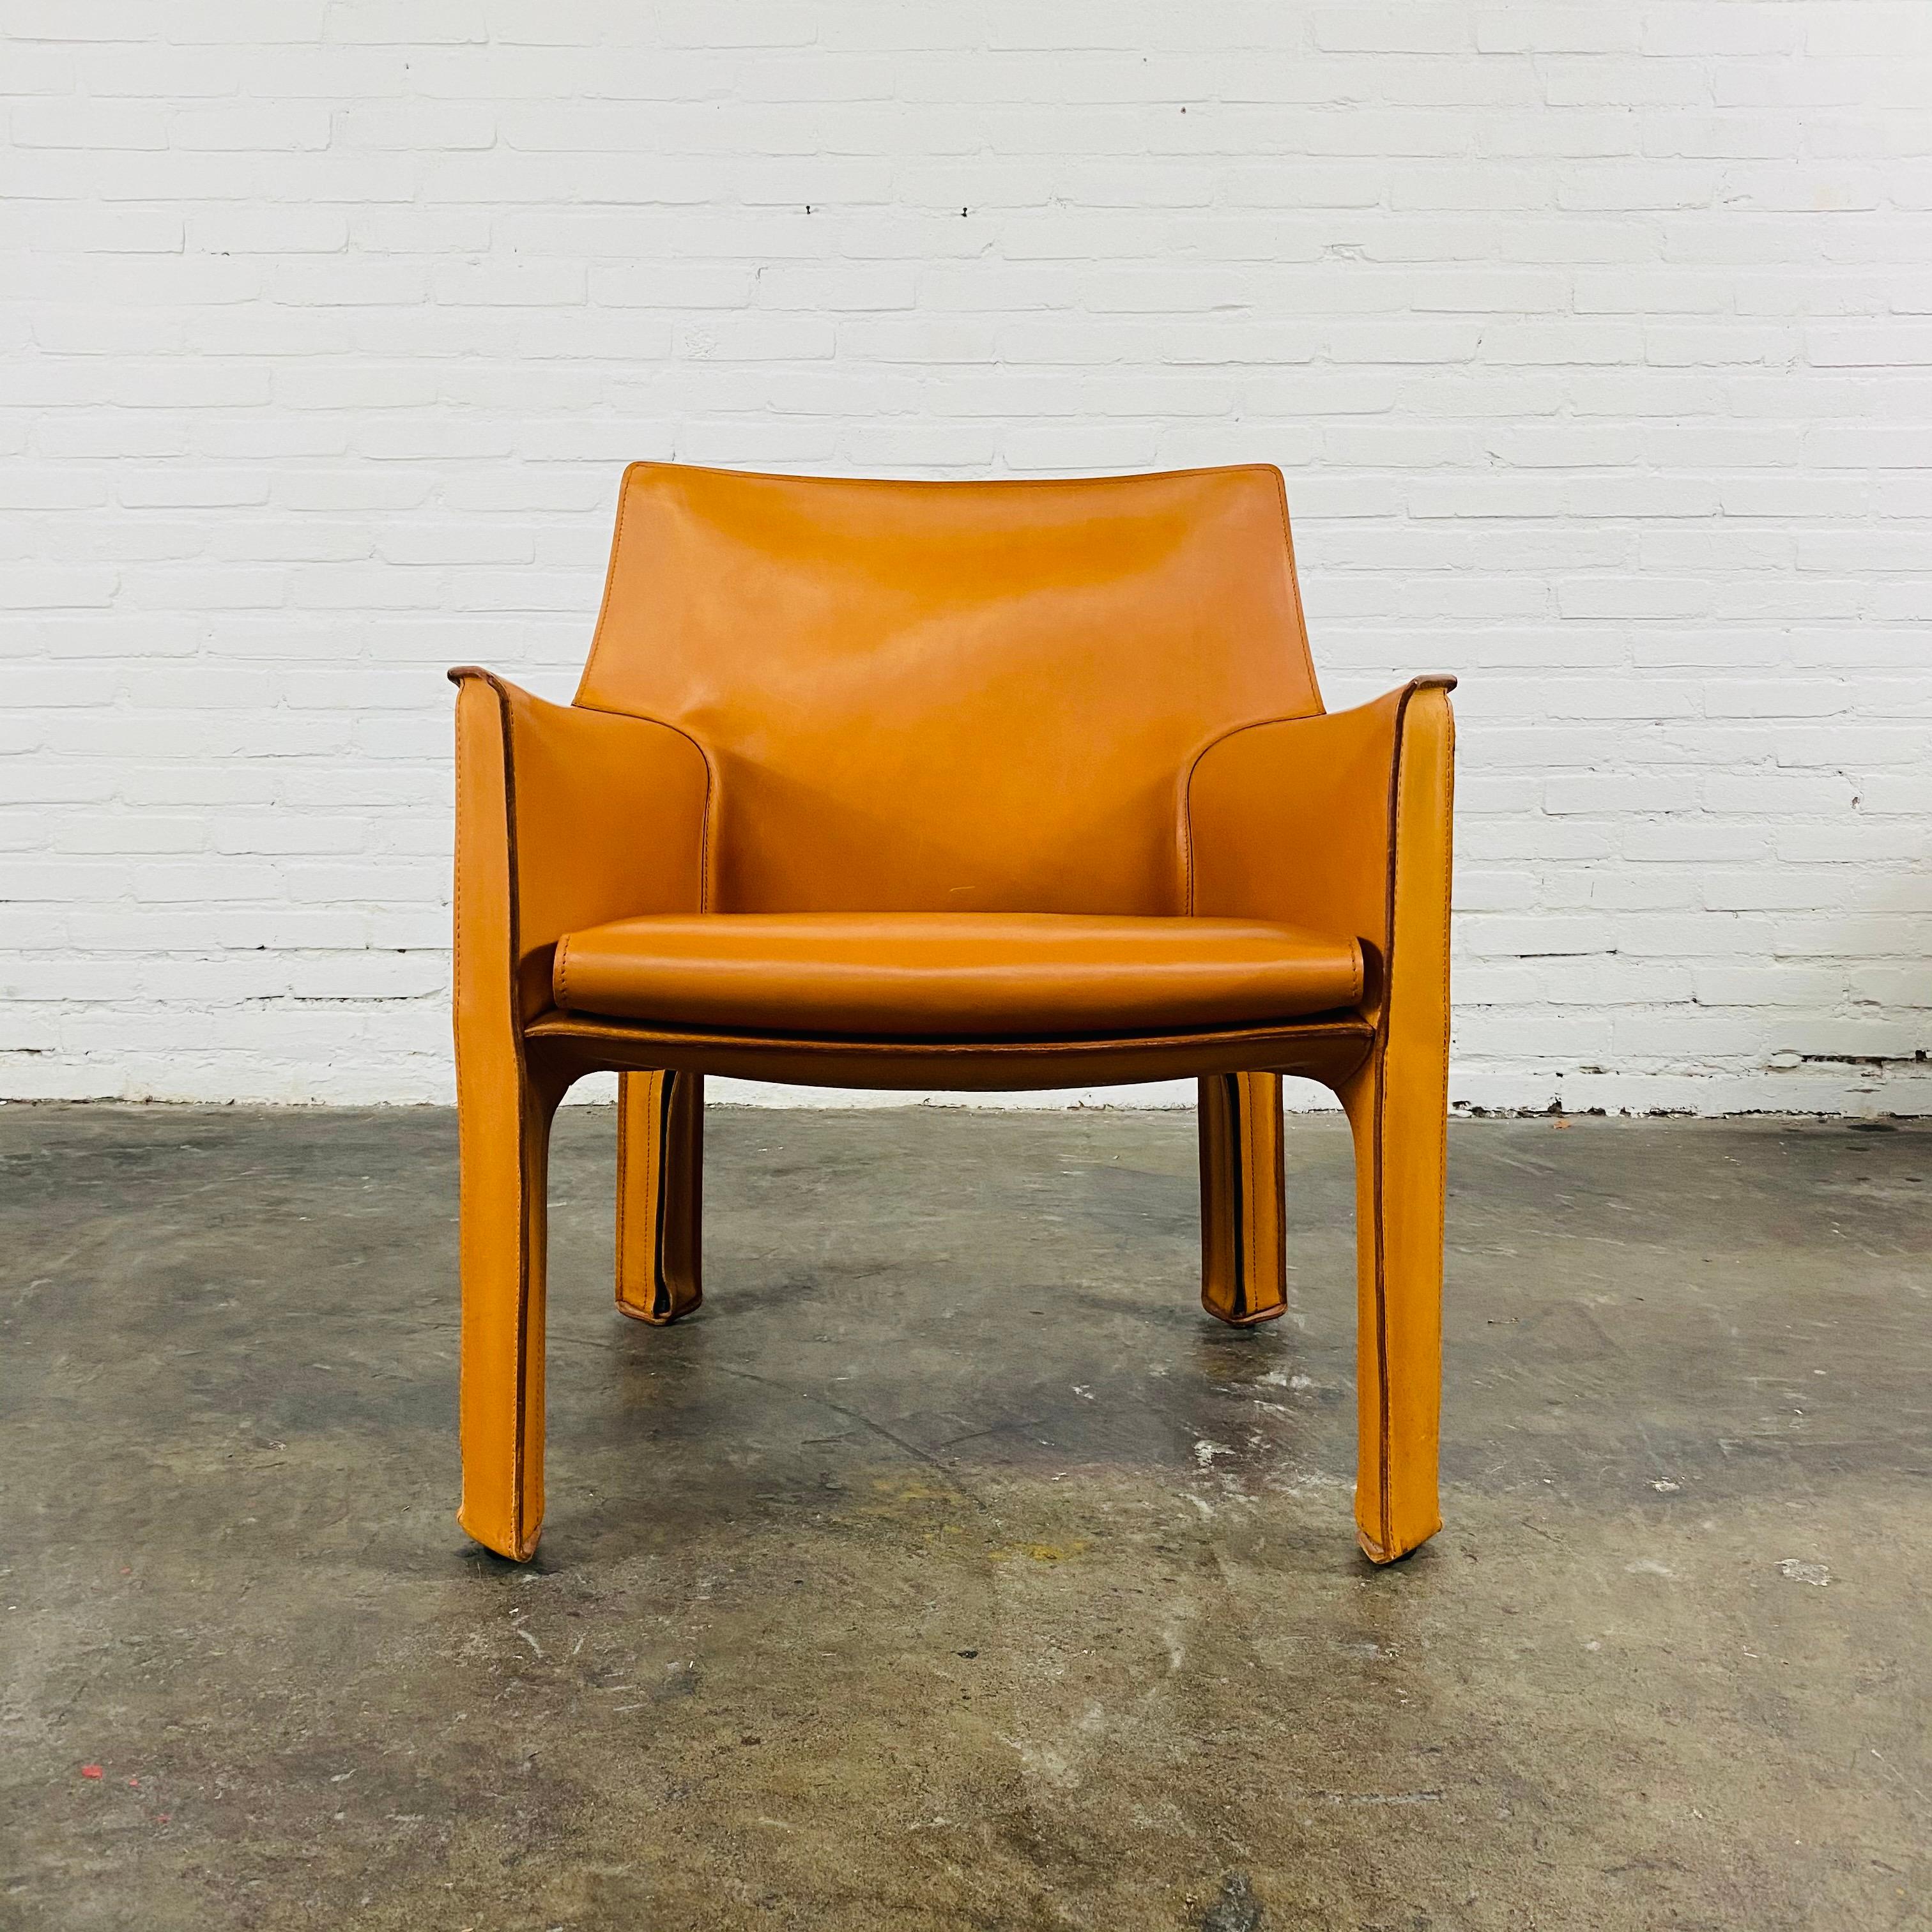 Mid-Century Modern Vintage Italian Cab 414 Cognac Leather Chair by Mario Bellini for Cassina, 1970 